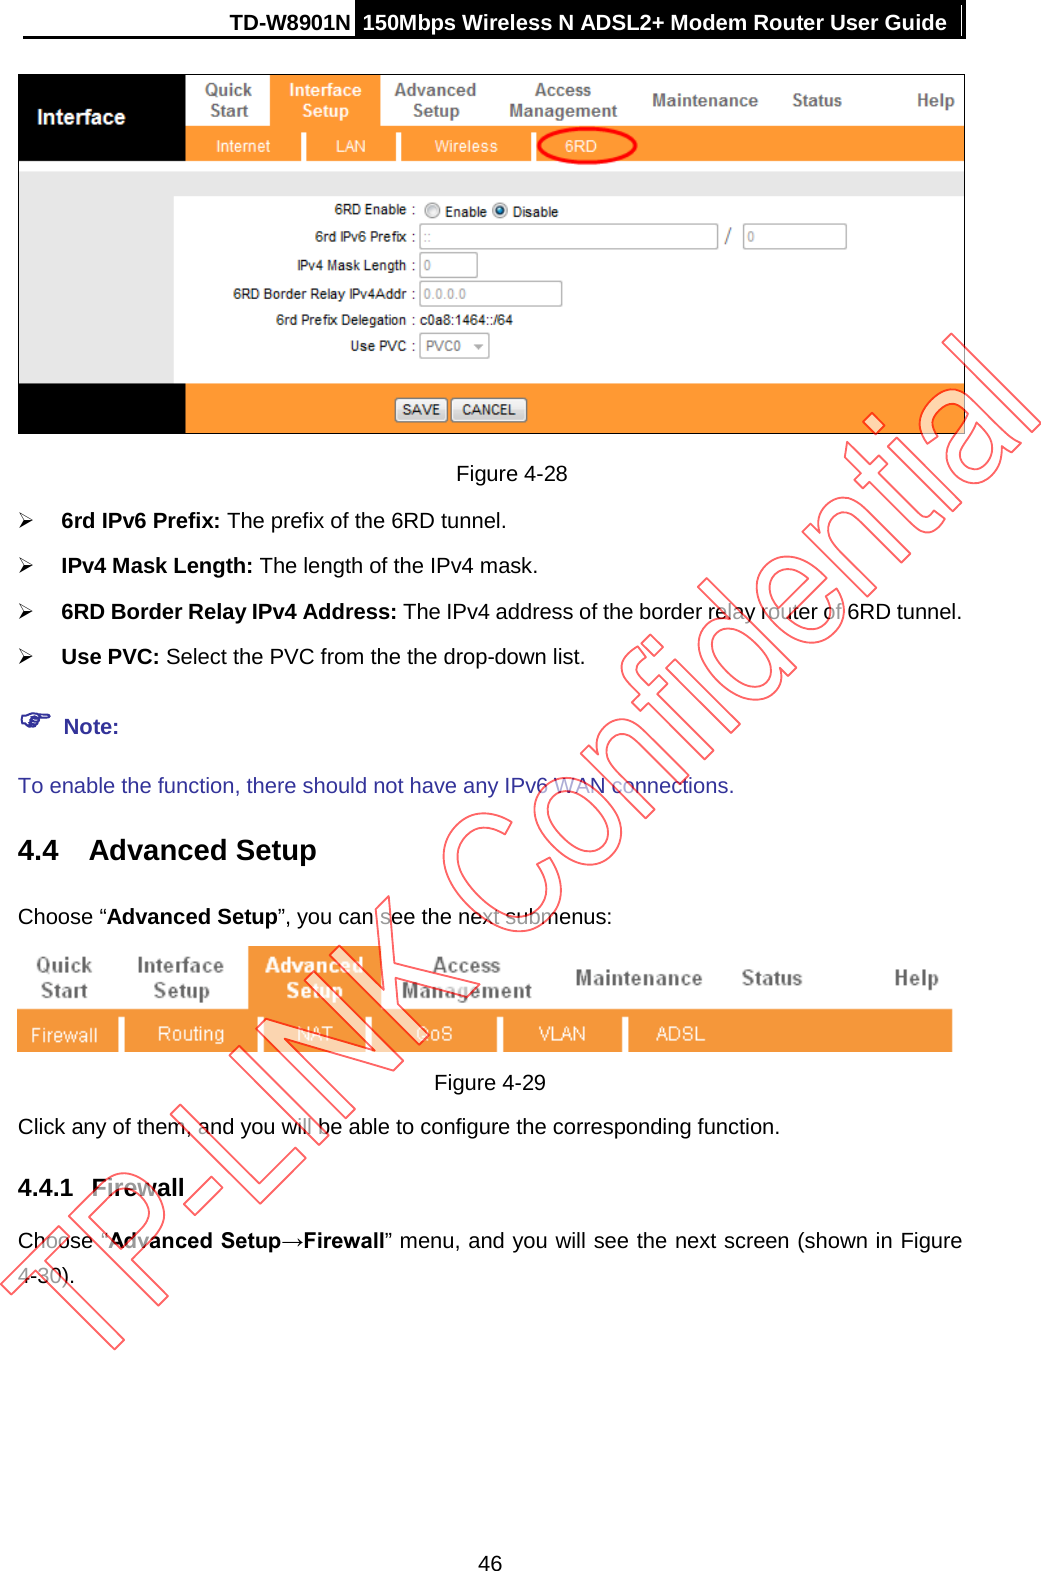 TD-W8901N 150Mbps Wireless N ADSL2+ Modem Router User Guide   Figure 4-28  6rd IPv6 Prefix: The prefix of the 6RD tunnel.  IPv4 Mask Length: The length of the IPv4 mask.  6RD Border Relay IPv4 Address: The IPv4 address of the border relay router of 6RD tunnel.  Use PVC: Select the PVC from the the drop-down list.  Note: To enable the function, there should not have any IPv6 WAN connections. 4.4 Advanced Setup Choose “Advanced Setup”, you can see the next submenus:  Figure 4-29 Click any of them, and you will be able to configure the corresponding function. 4.4.1 Firewall Choose “Advanced Setup→Firewall” menu, and you will see the next screen (shown in Figure 4-30).   46 